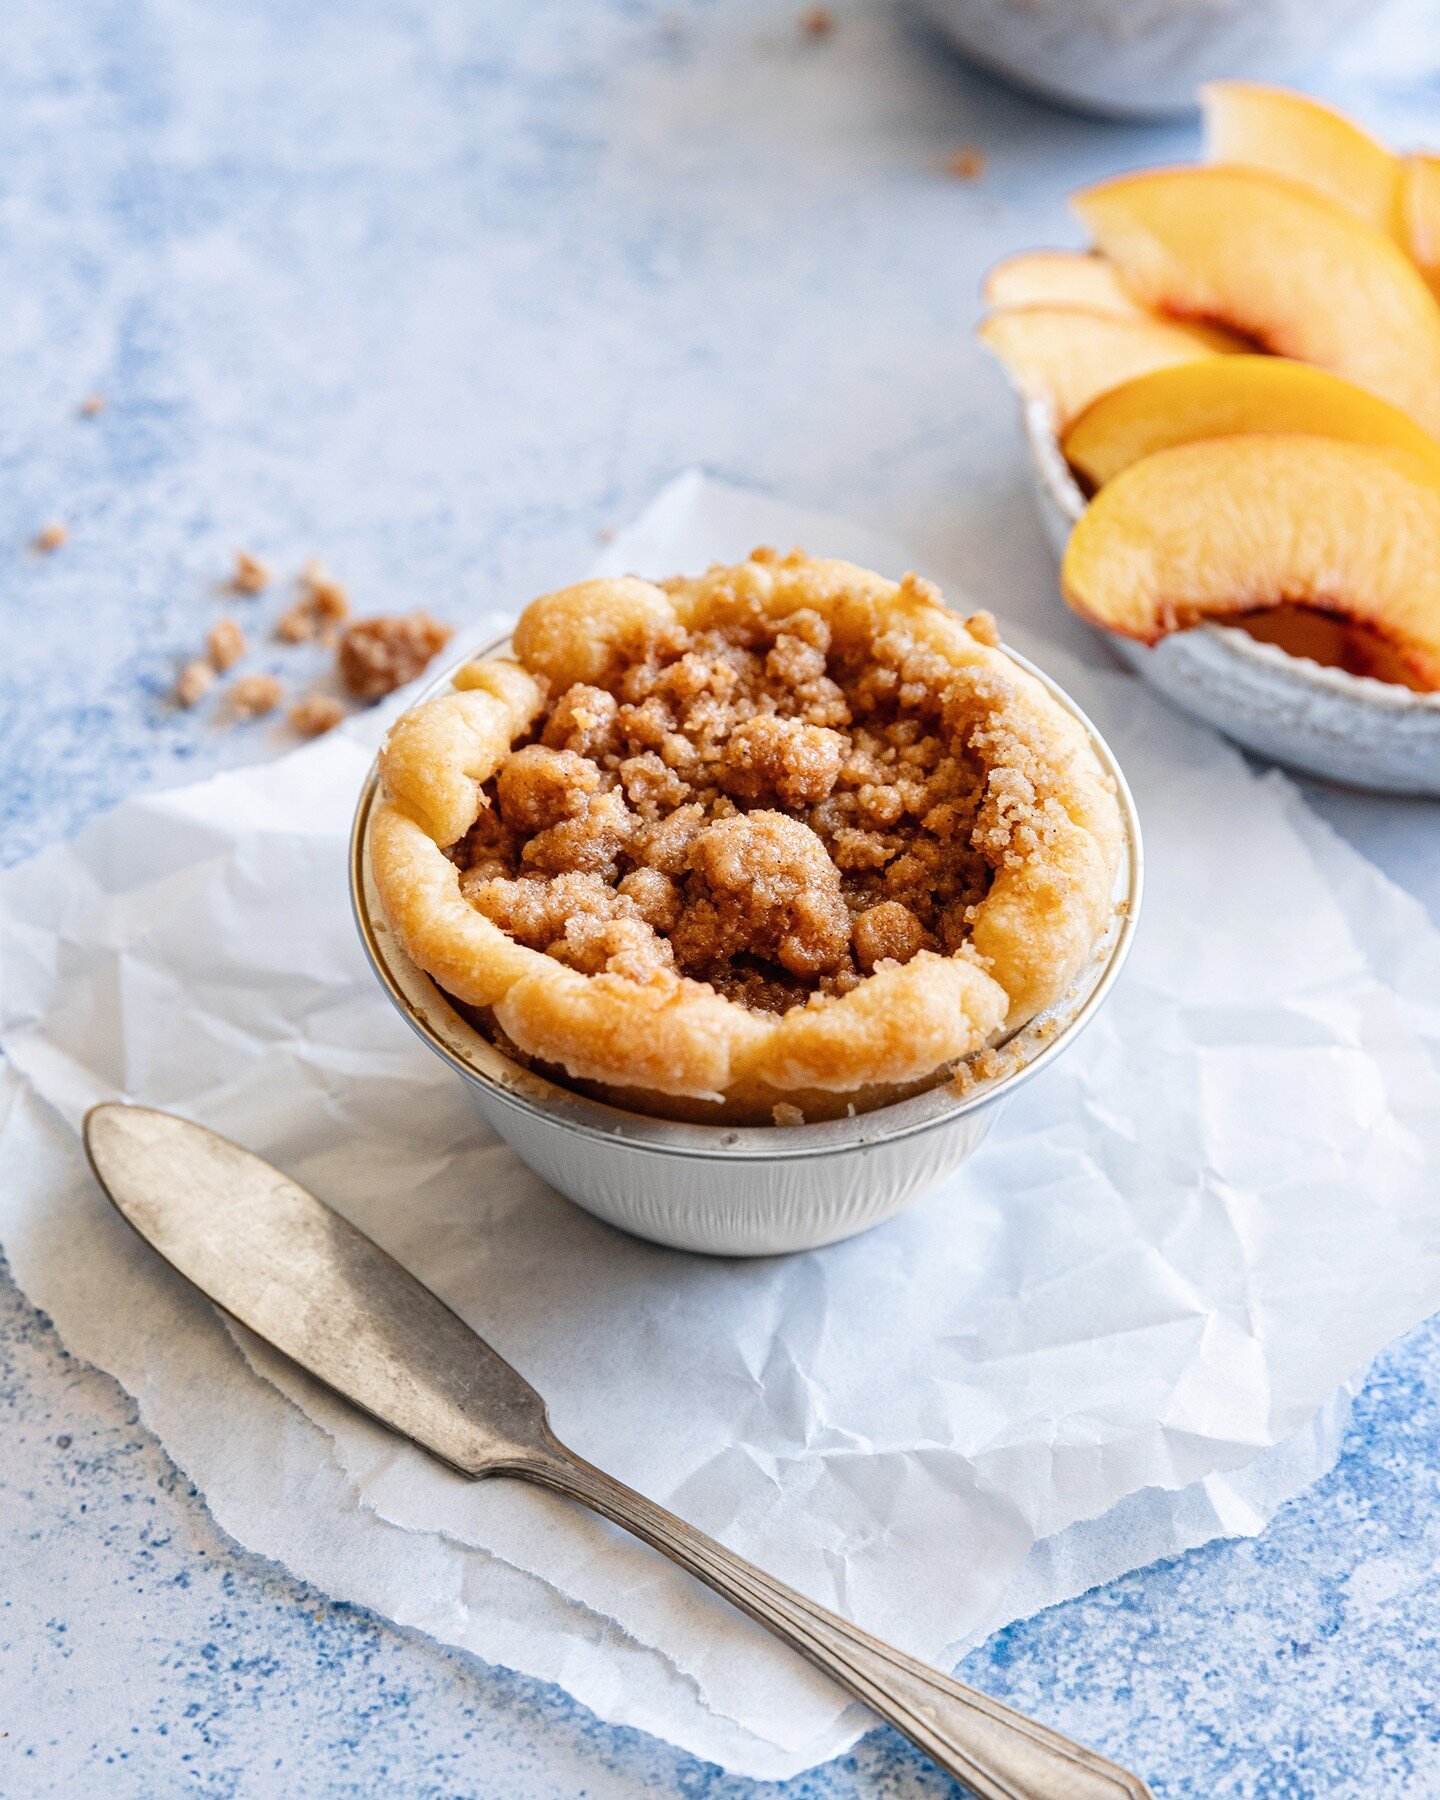 Want to level up your Georgia Peach Little Pie at home? Warm it up in the oven at 325&deg;F for about 8 minutes and top with a scoop of vanilla ice cream!
📸: @caraharmanphoto